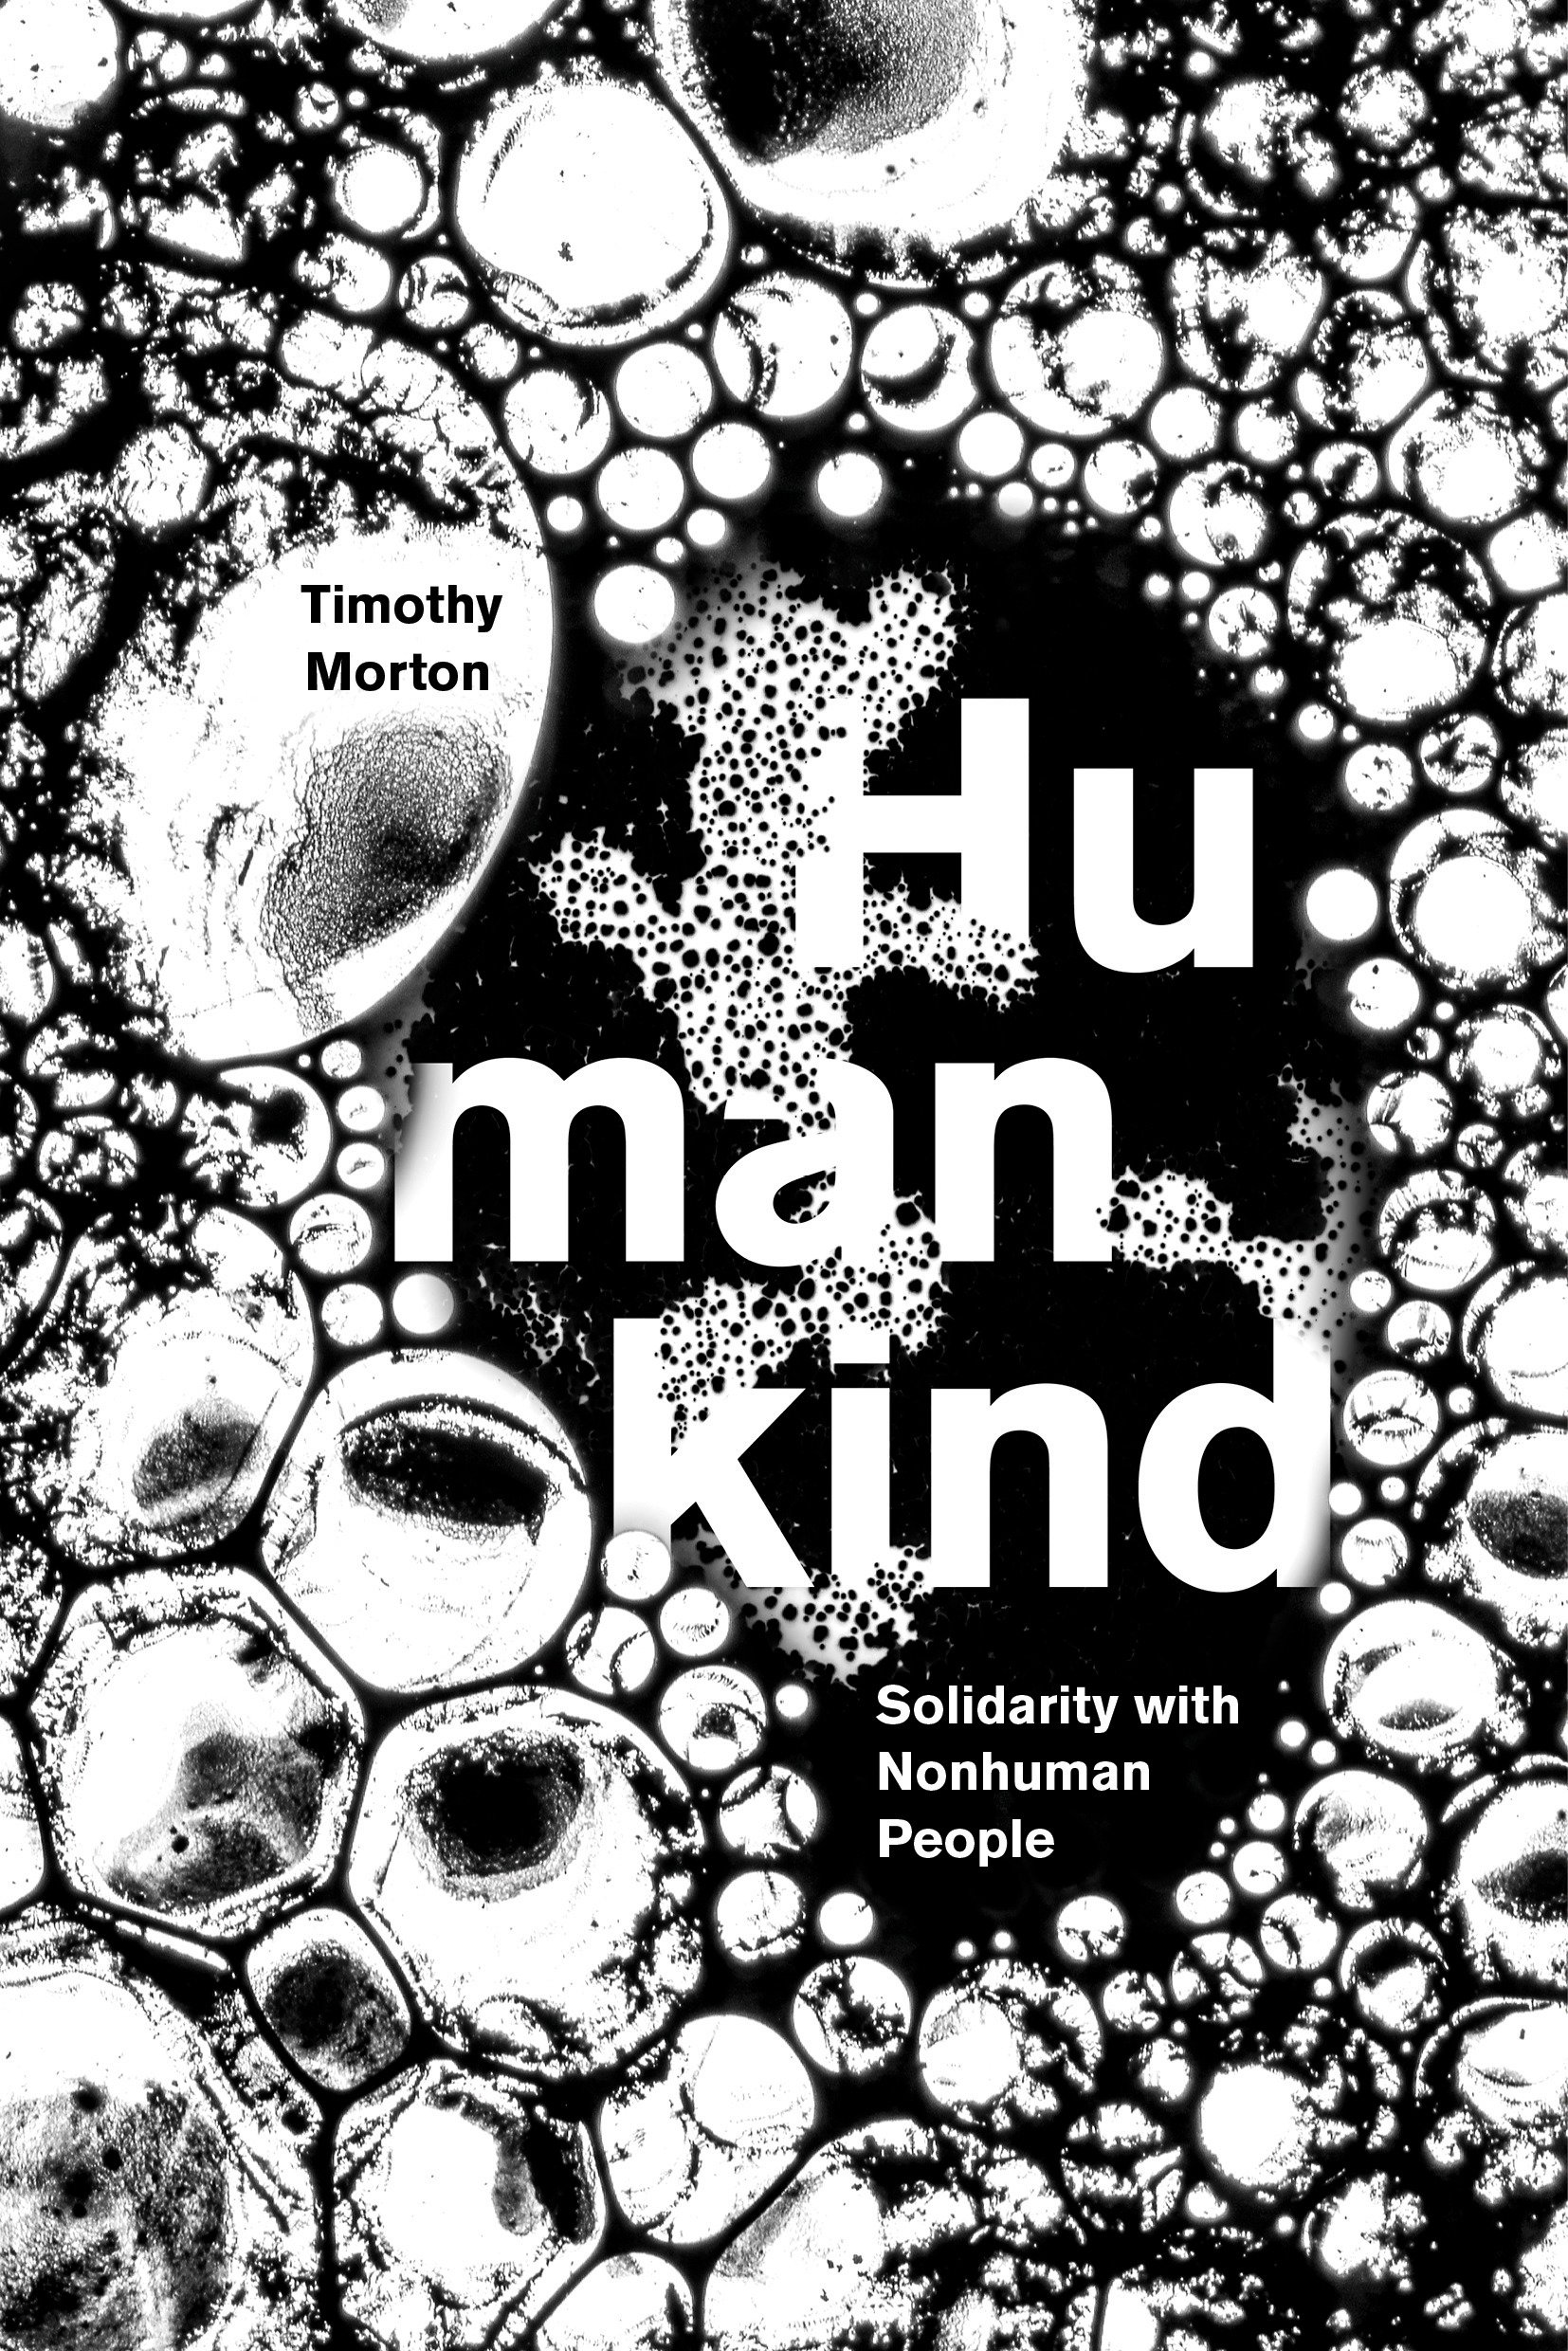 Humankind (Hardcover Book)